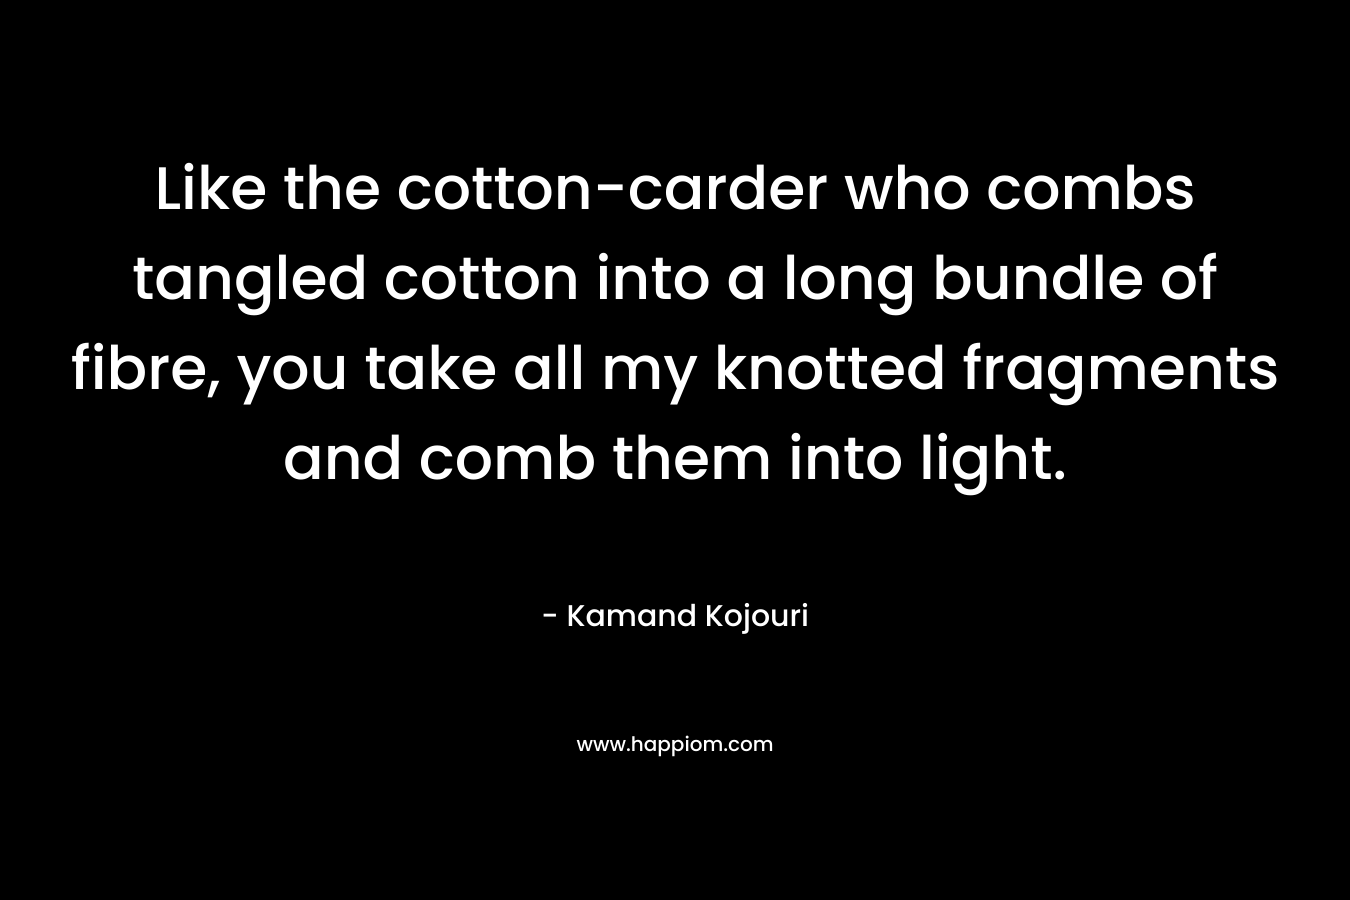 Like the cotton-carder who combs tangled cotton into a long bundle of fibre, you take all my knotted fragments and comb them into light. – Kamand Kojouri